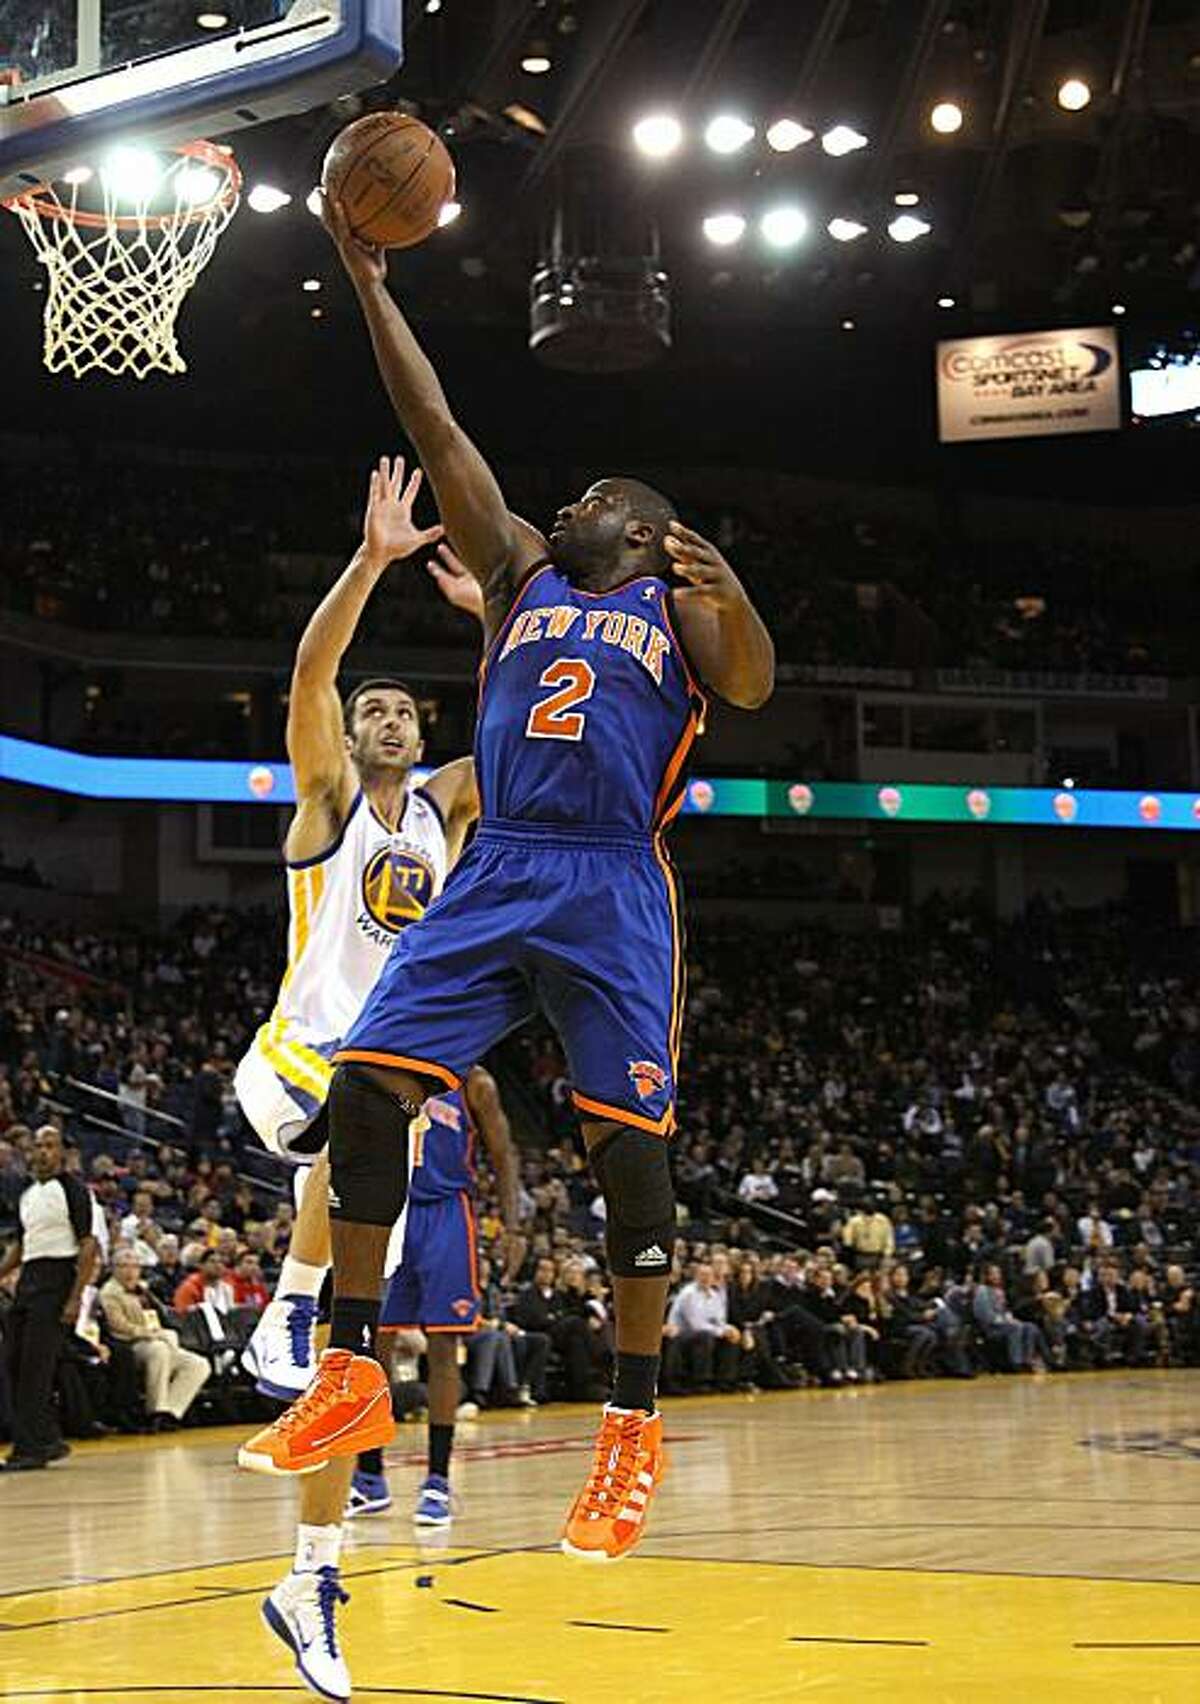 OAKLAND, CA - NOVEMBER 19: Raymond Felton #2 of the New York Knicks shoots the ball during their game against the Golden State Warriors at Oracle Arena on November 19, 2010 in Oakland, California. NOTE TO USER: User expressly acknowledges and agrees that, by downloading and or using this photograph, User is consenting to the terms and conditions of the Getty Images License Agreement.